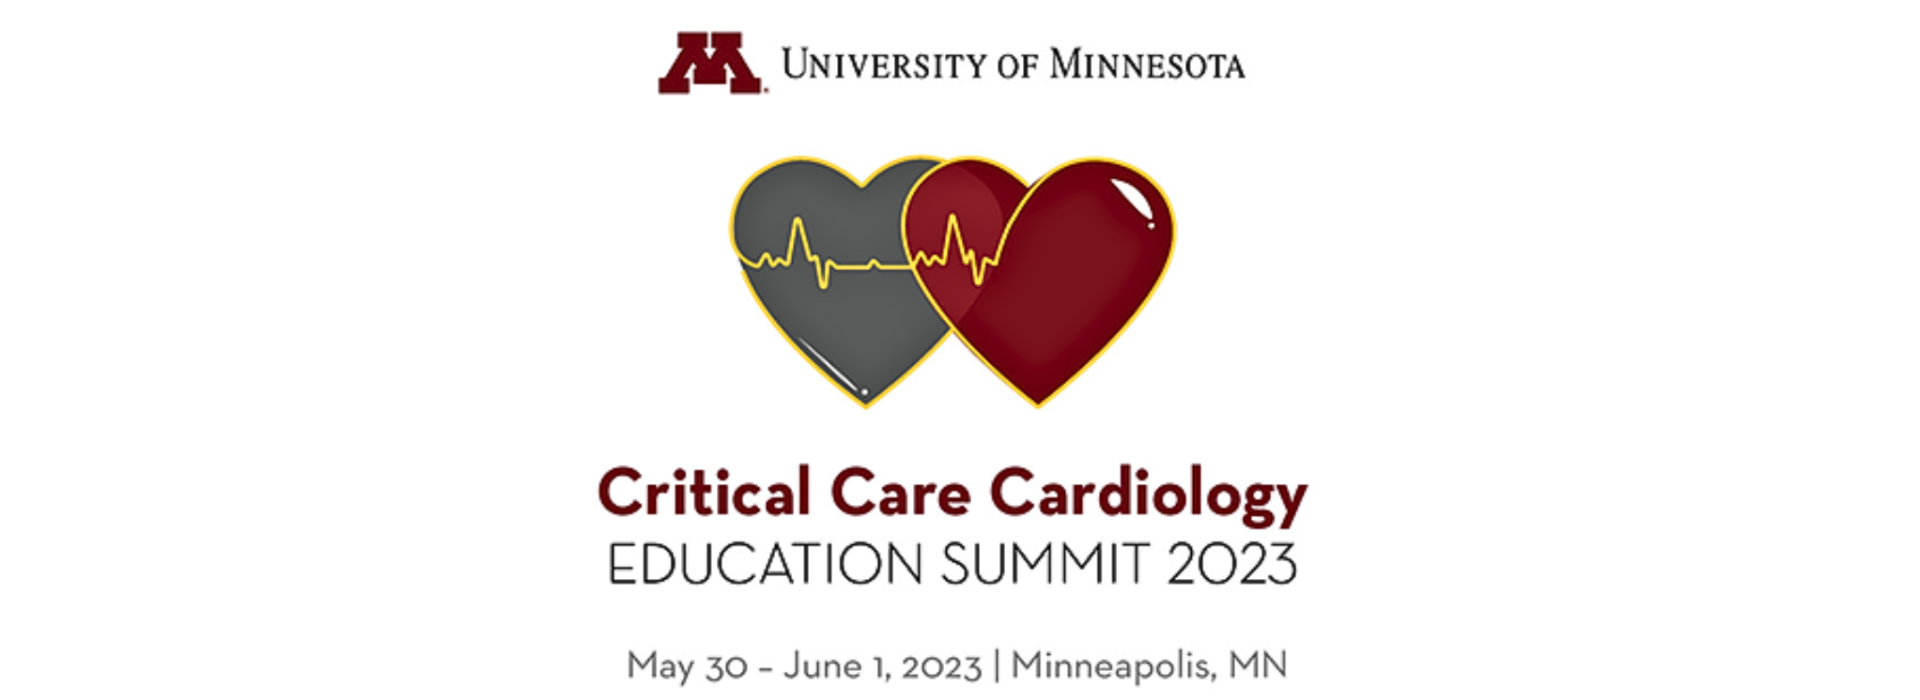 Critical Care Cardiology Education Summit 2023